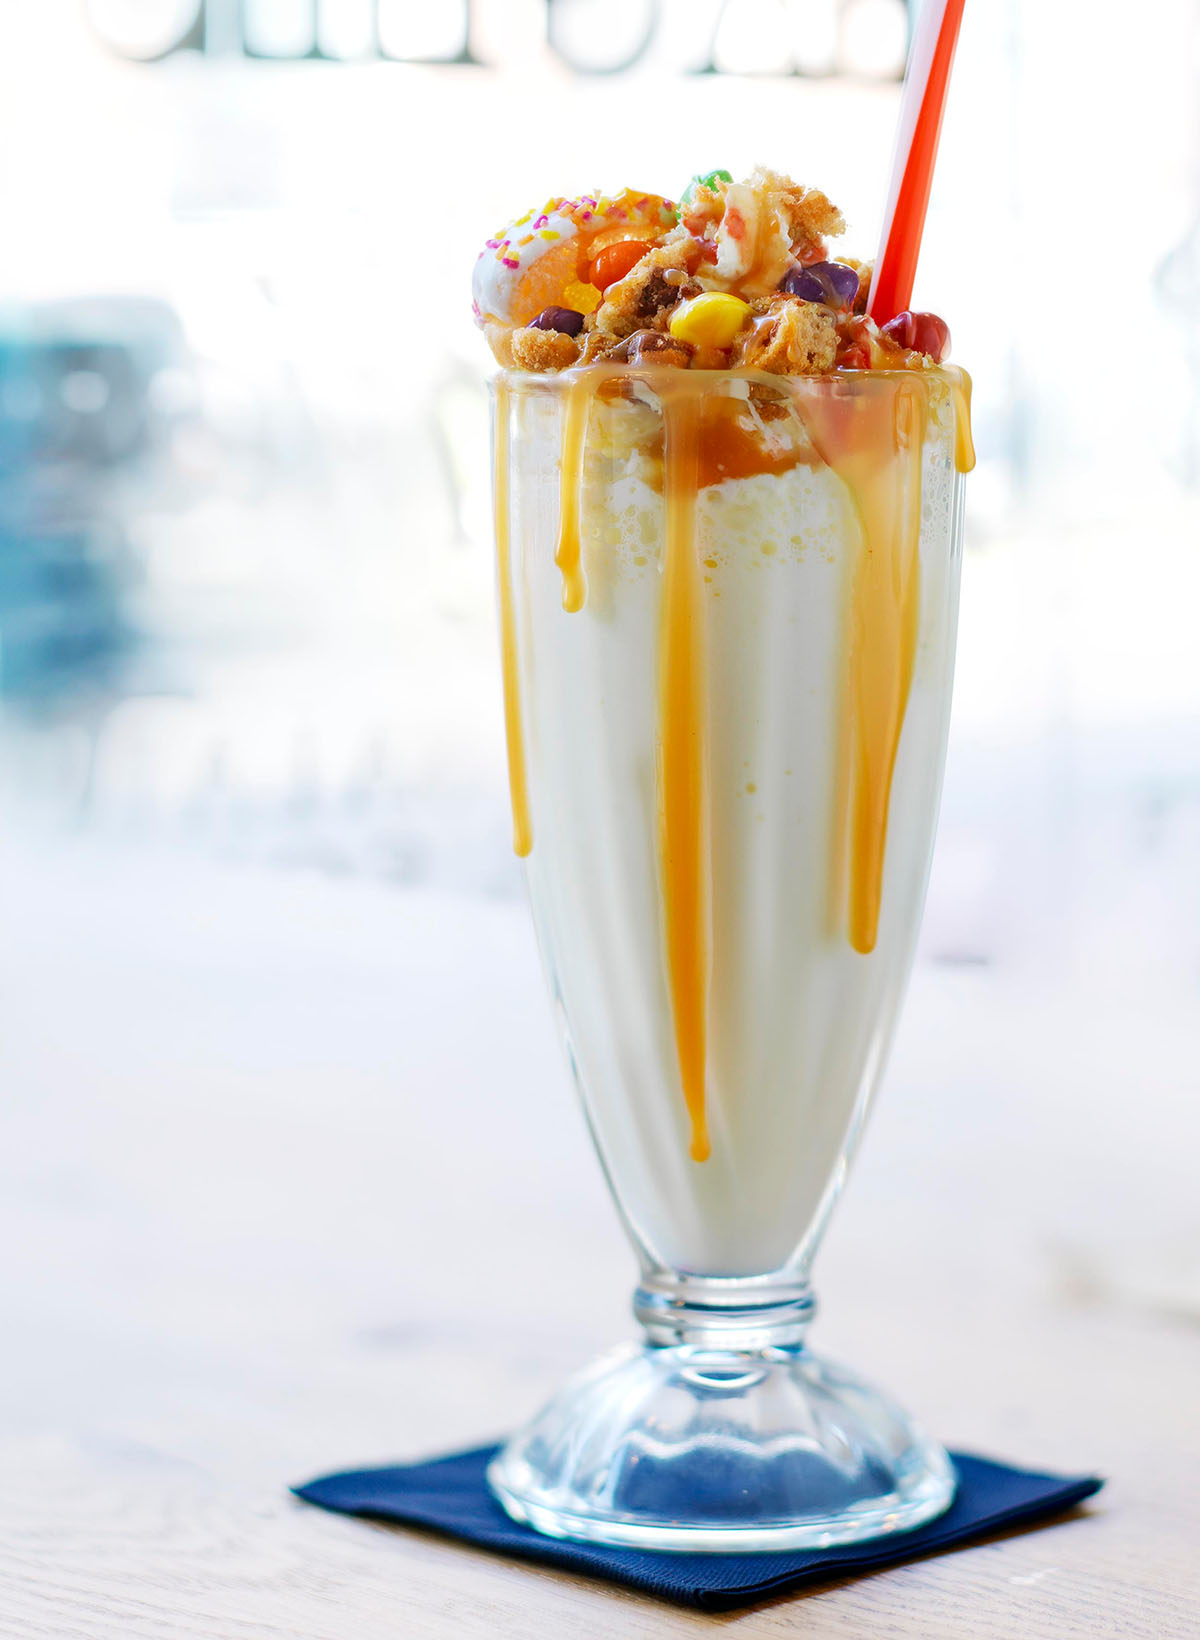 Food photography of glass of sweets milk shake made by Studio_m Photography Amsterdam